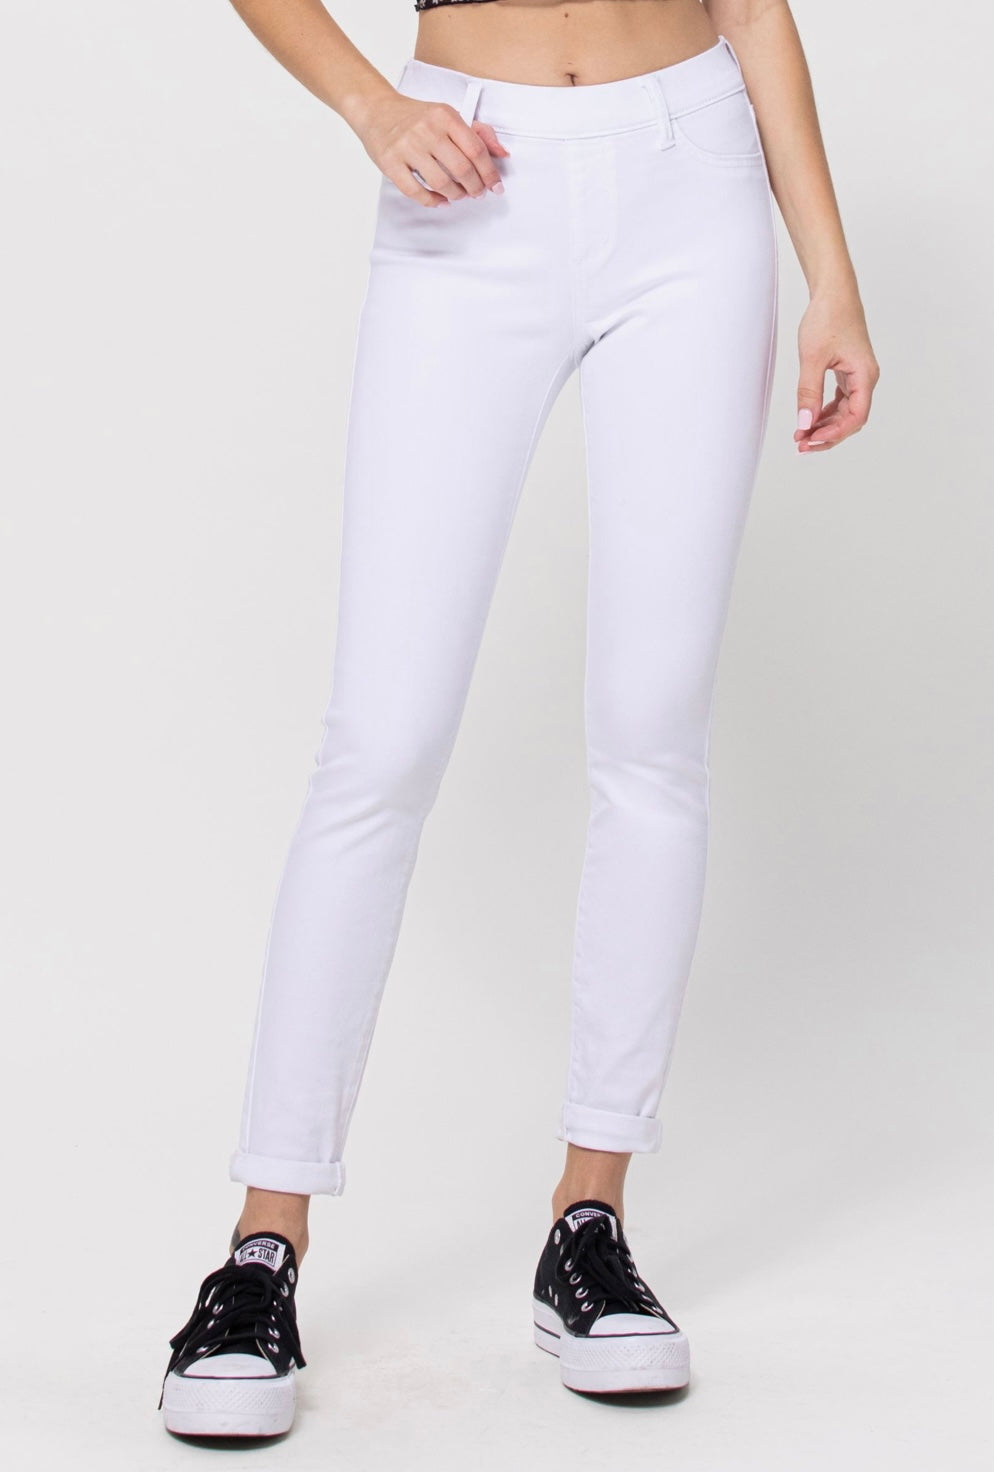 Cello Mid Rise Crop White Skinny Jeans